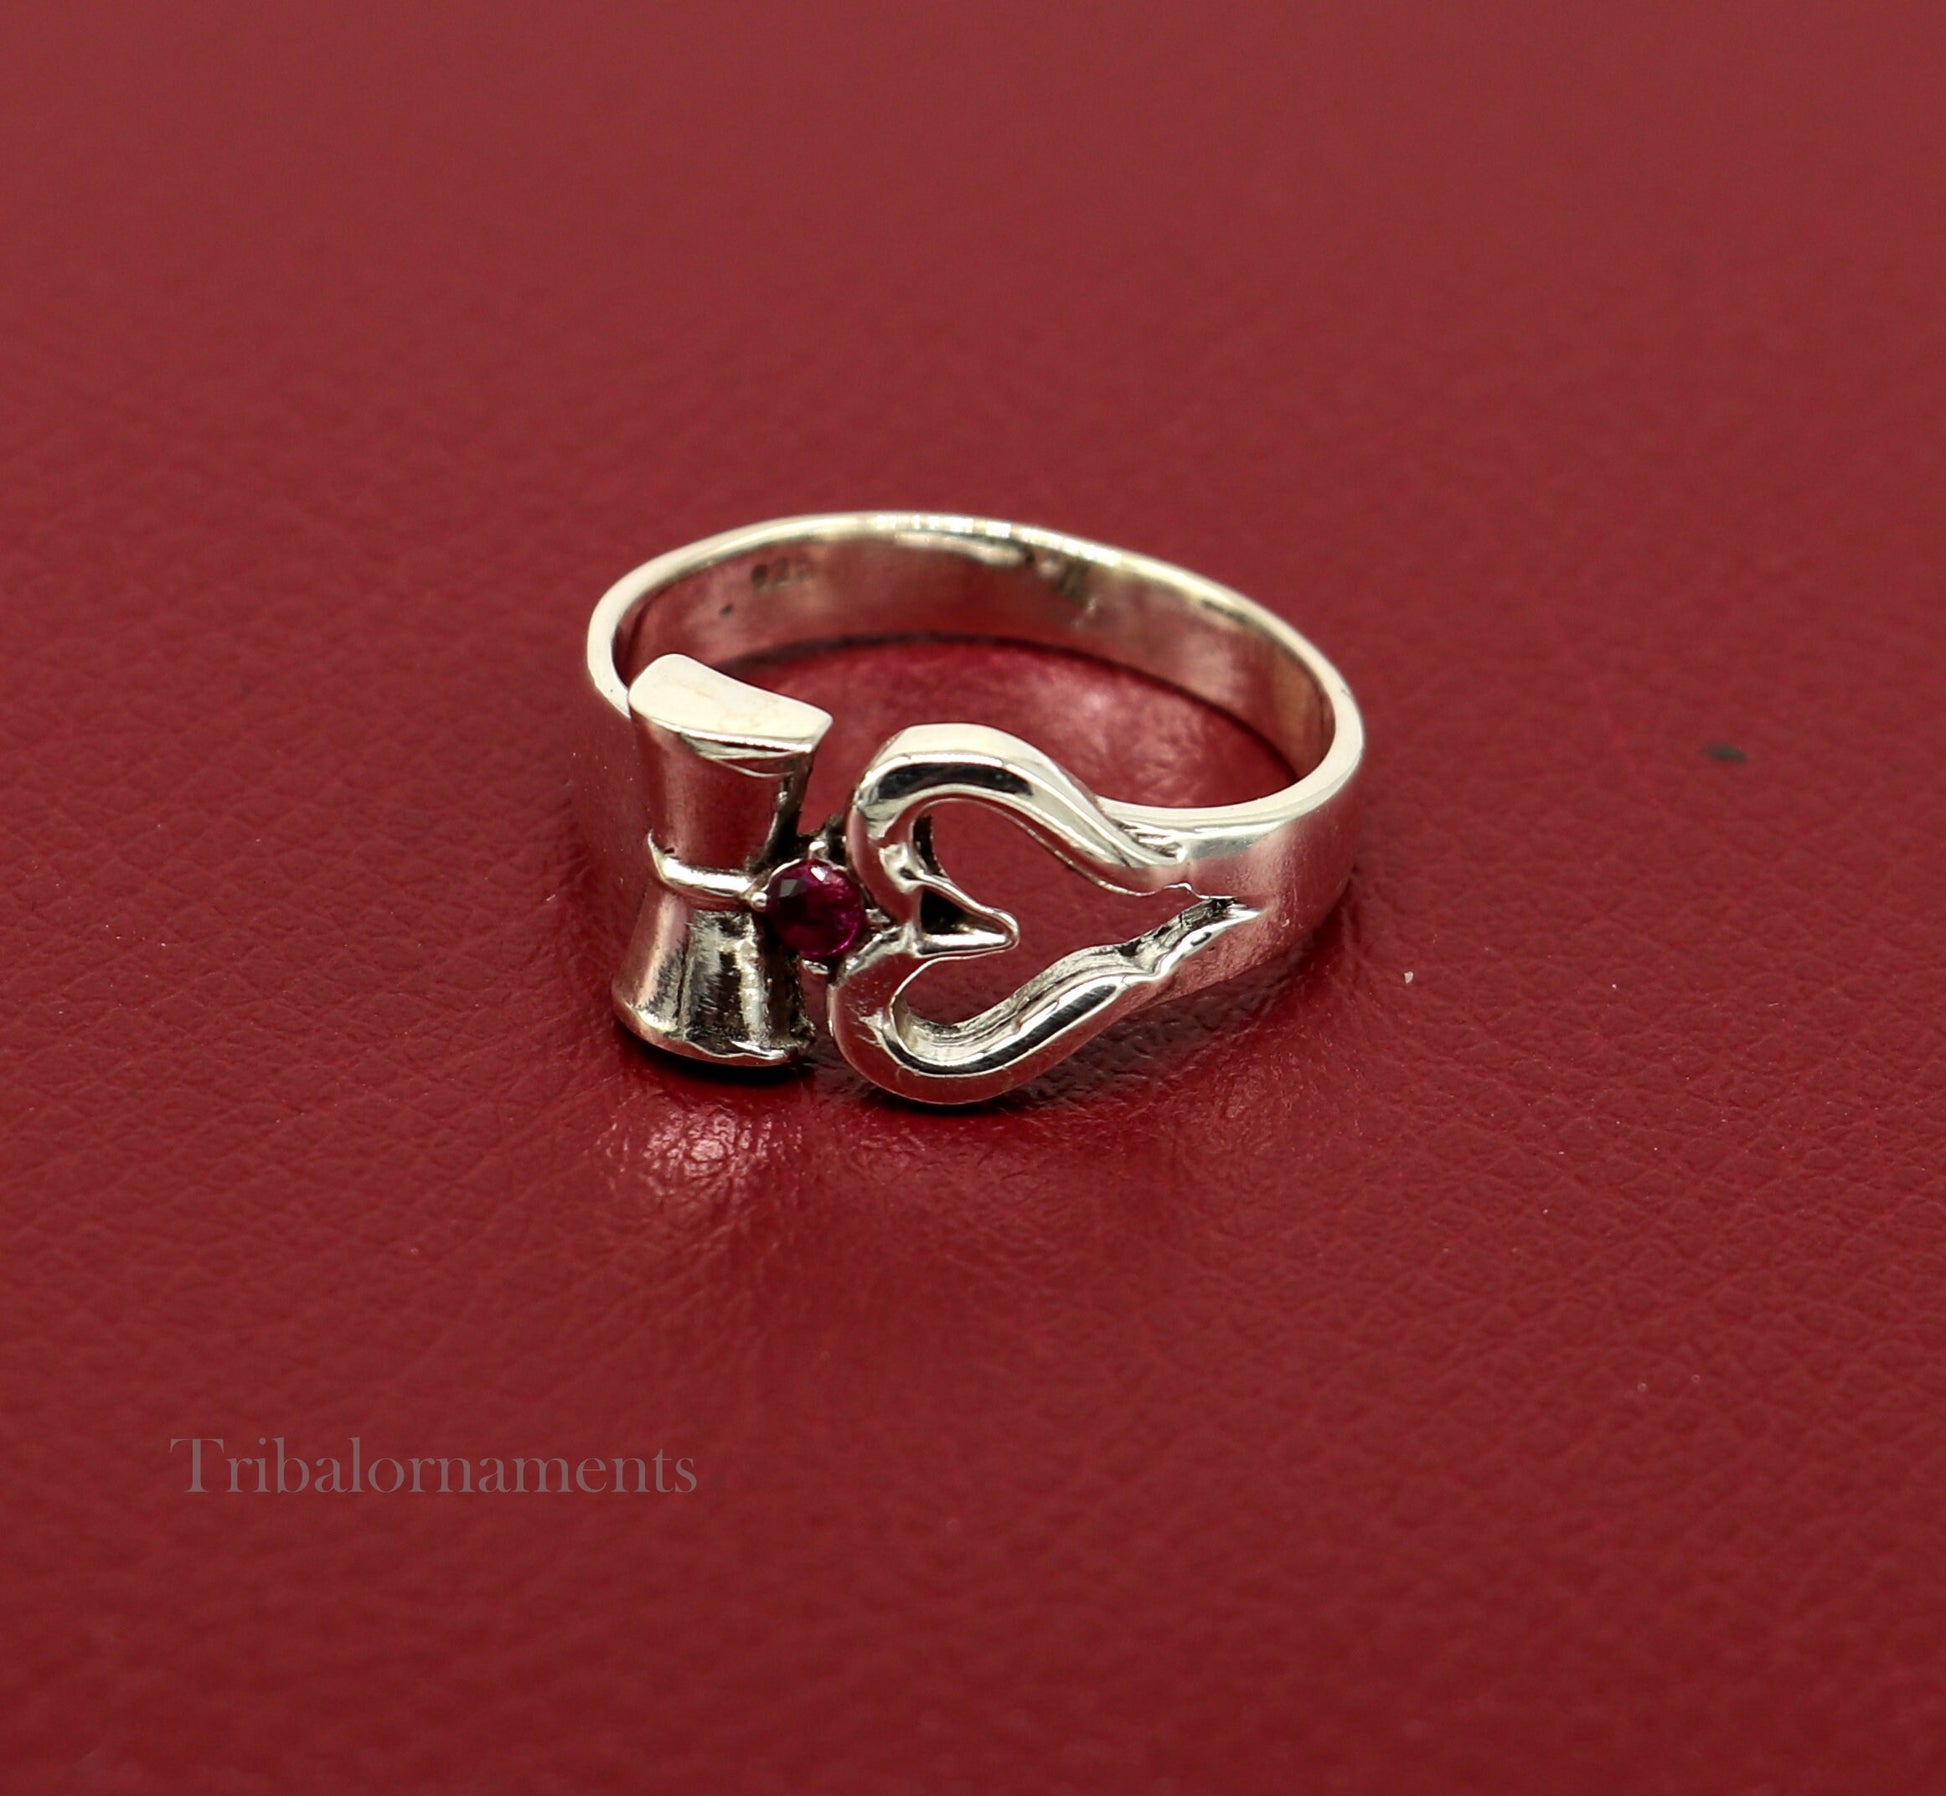 925 sterling silver vintage customized design shiva trident trishul damaru ring band, excellent customized ring unisex jewelry ring446 - TRIBAL ORNAMENTS